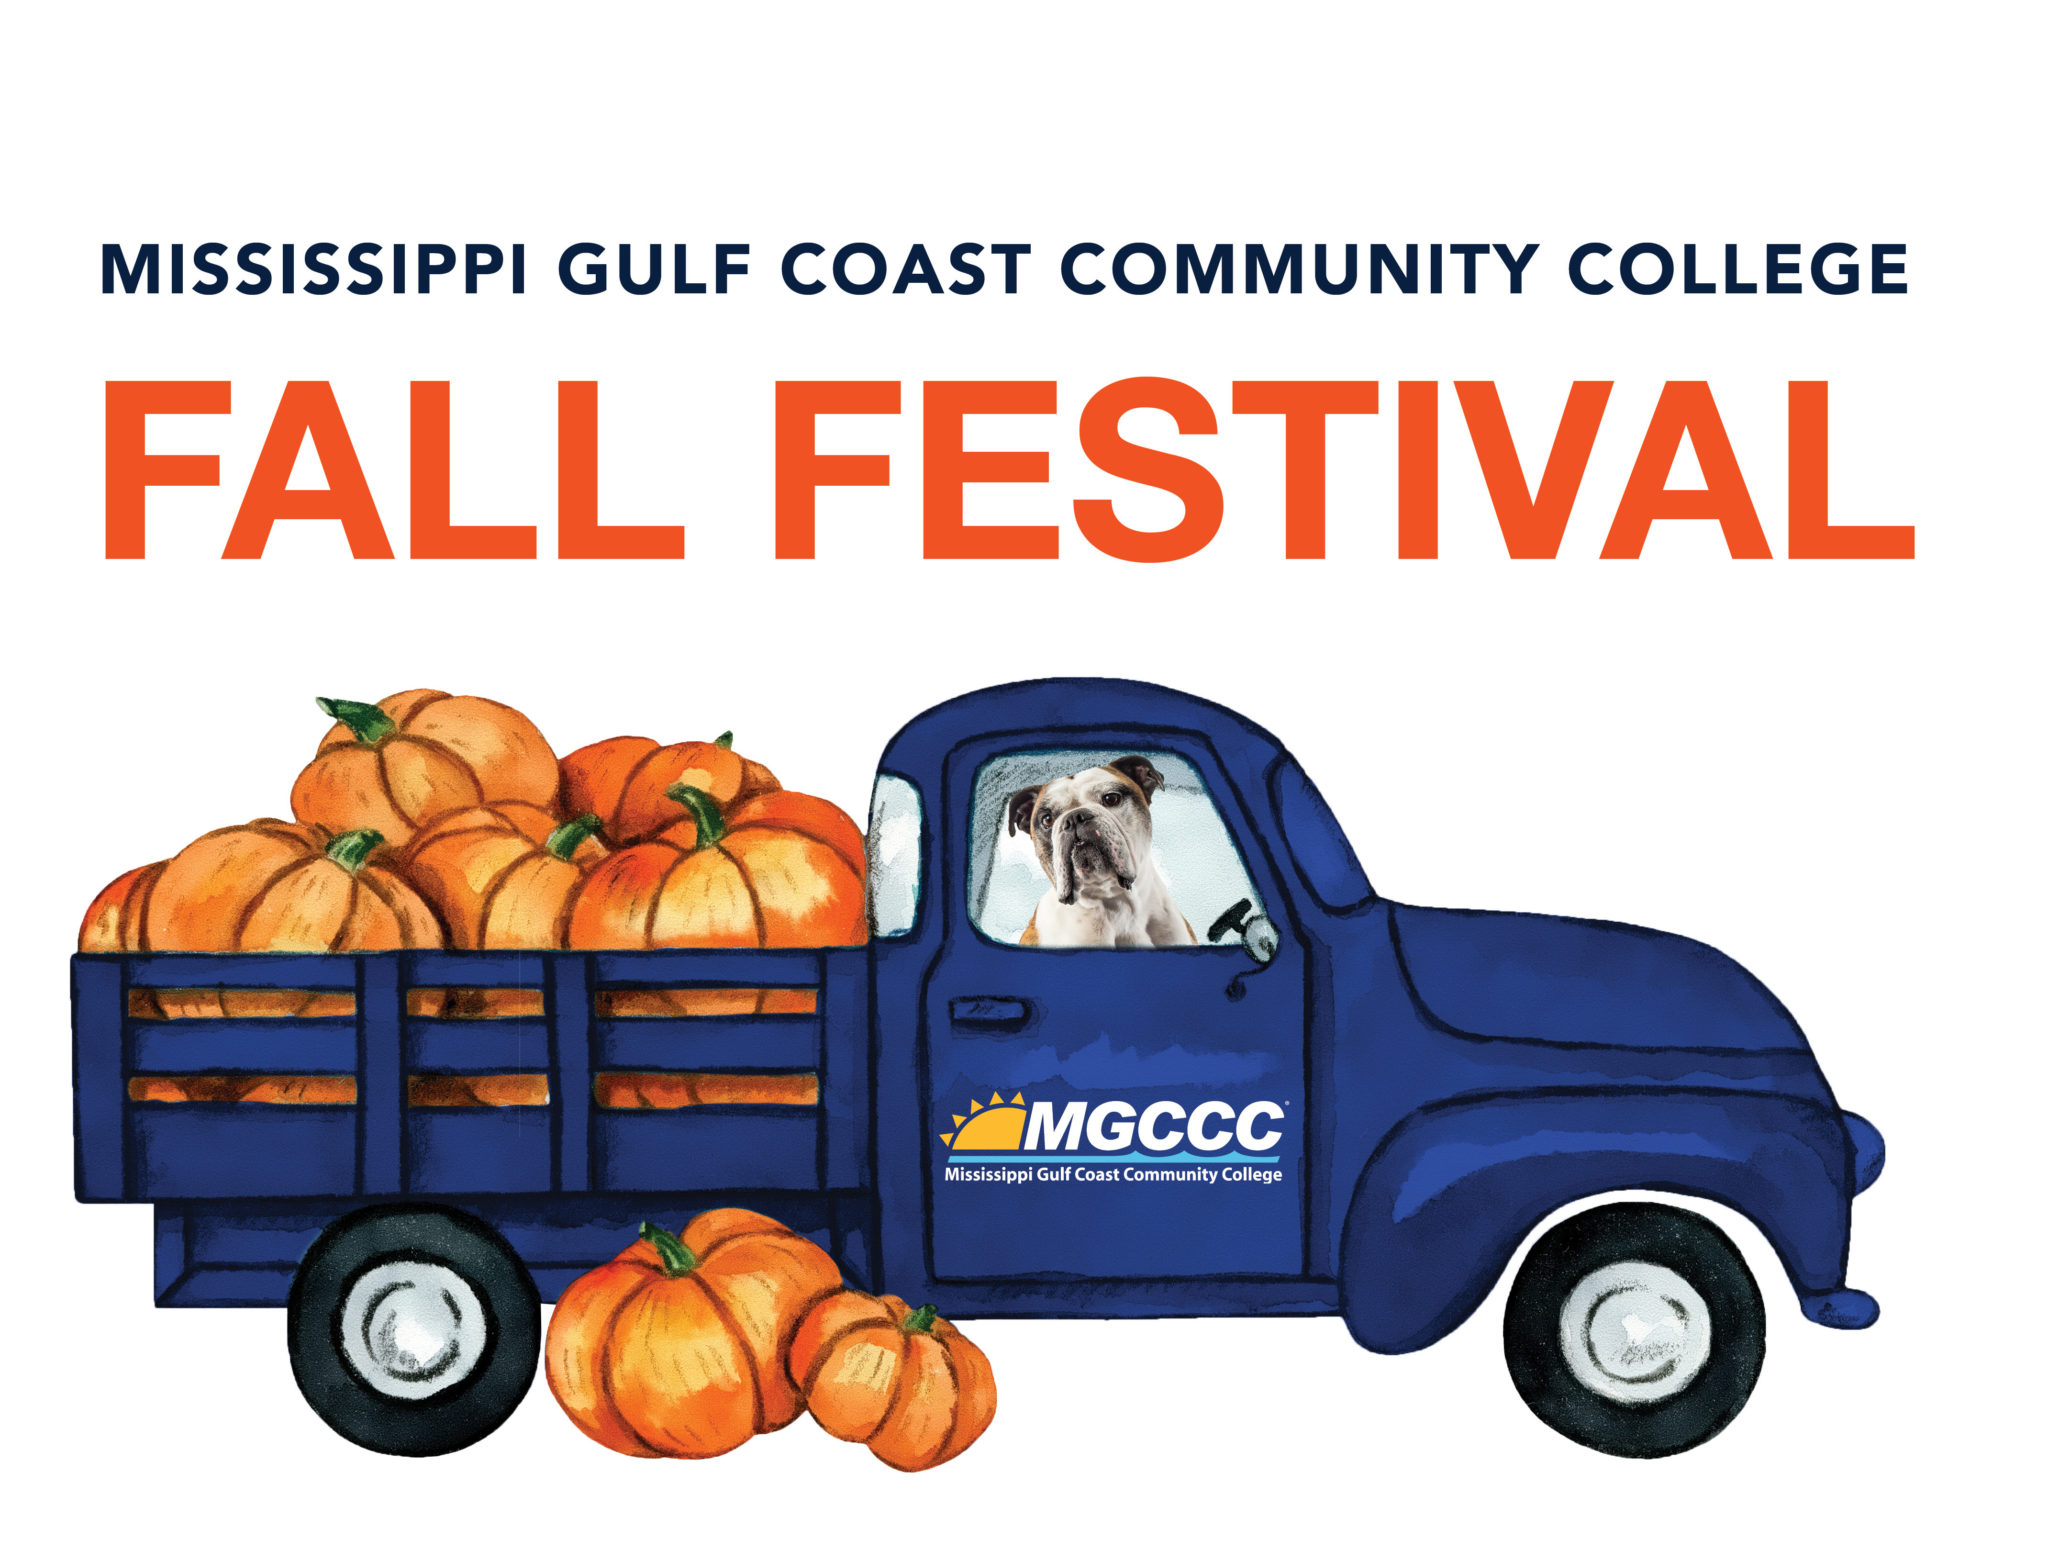 MGCCC Coast campuses offer fall festivals - Mississippi Gulf Coast